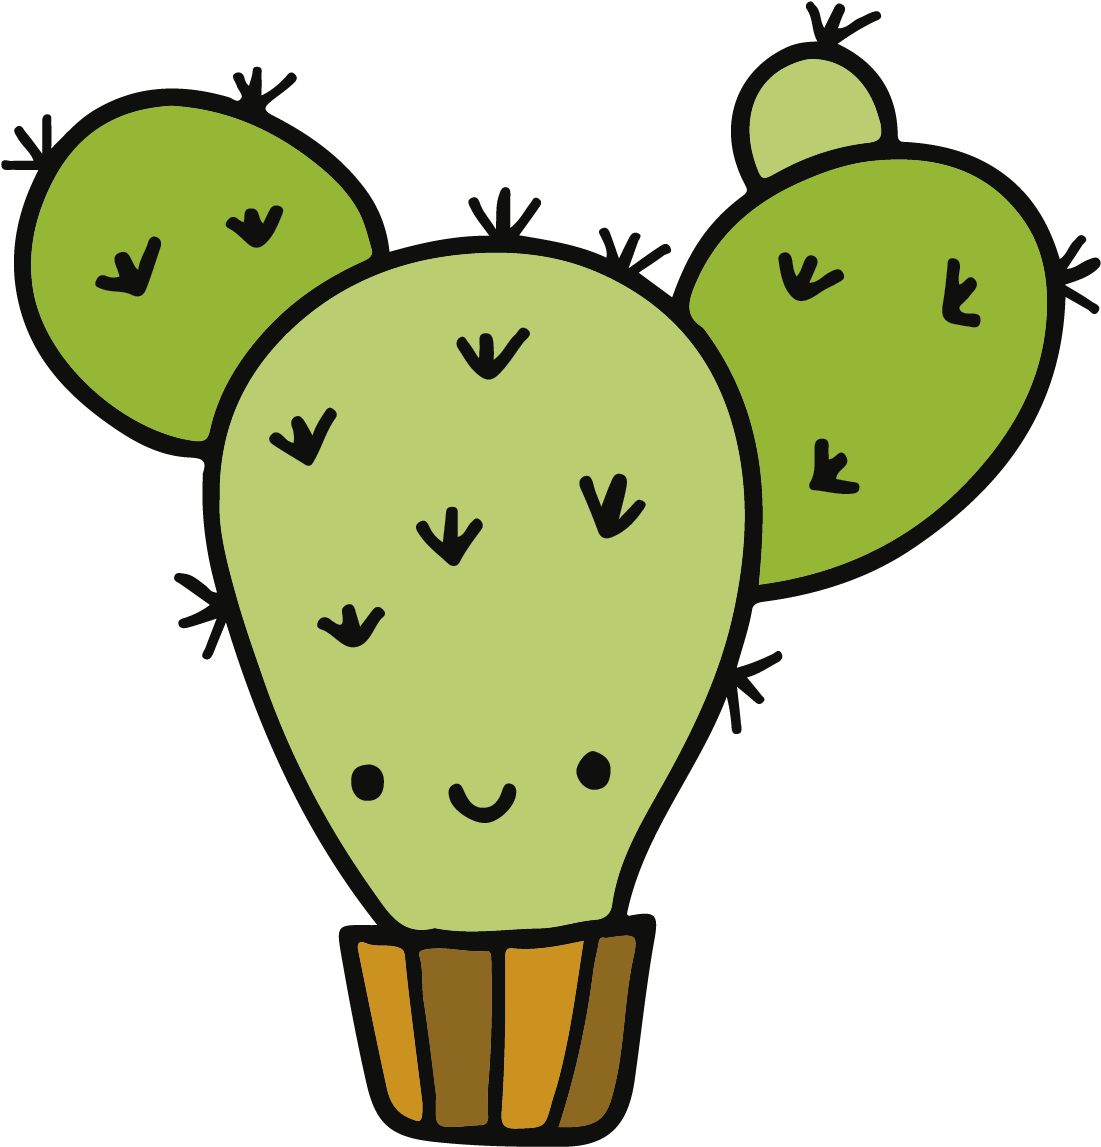 Download El Nopal - Cute Cactus Coloring Page PNG Image with No Background  - PNGkey.com